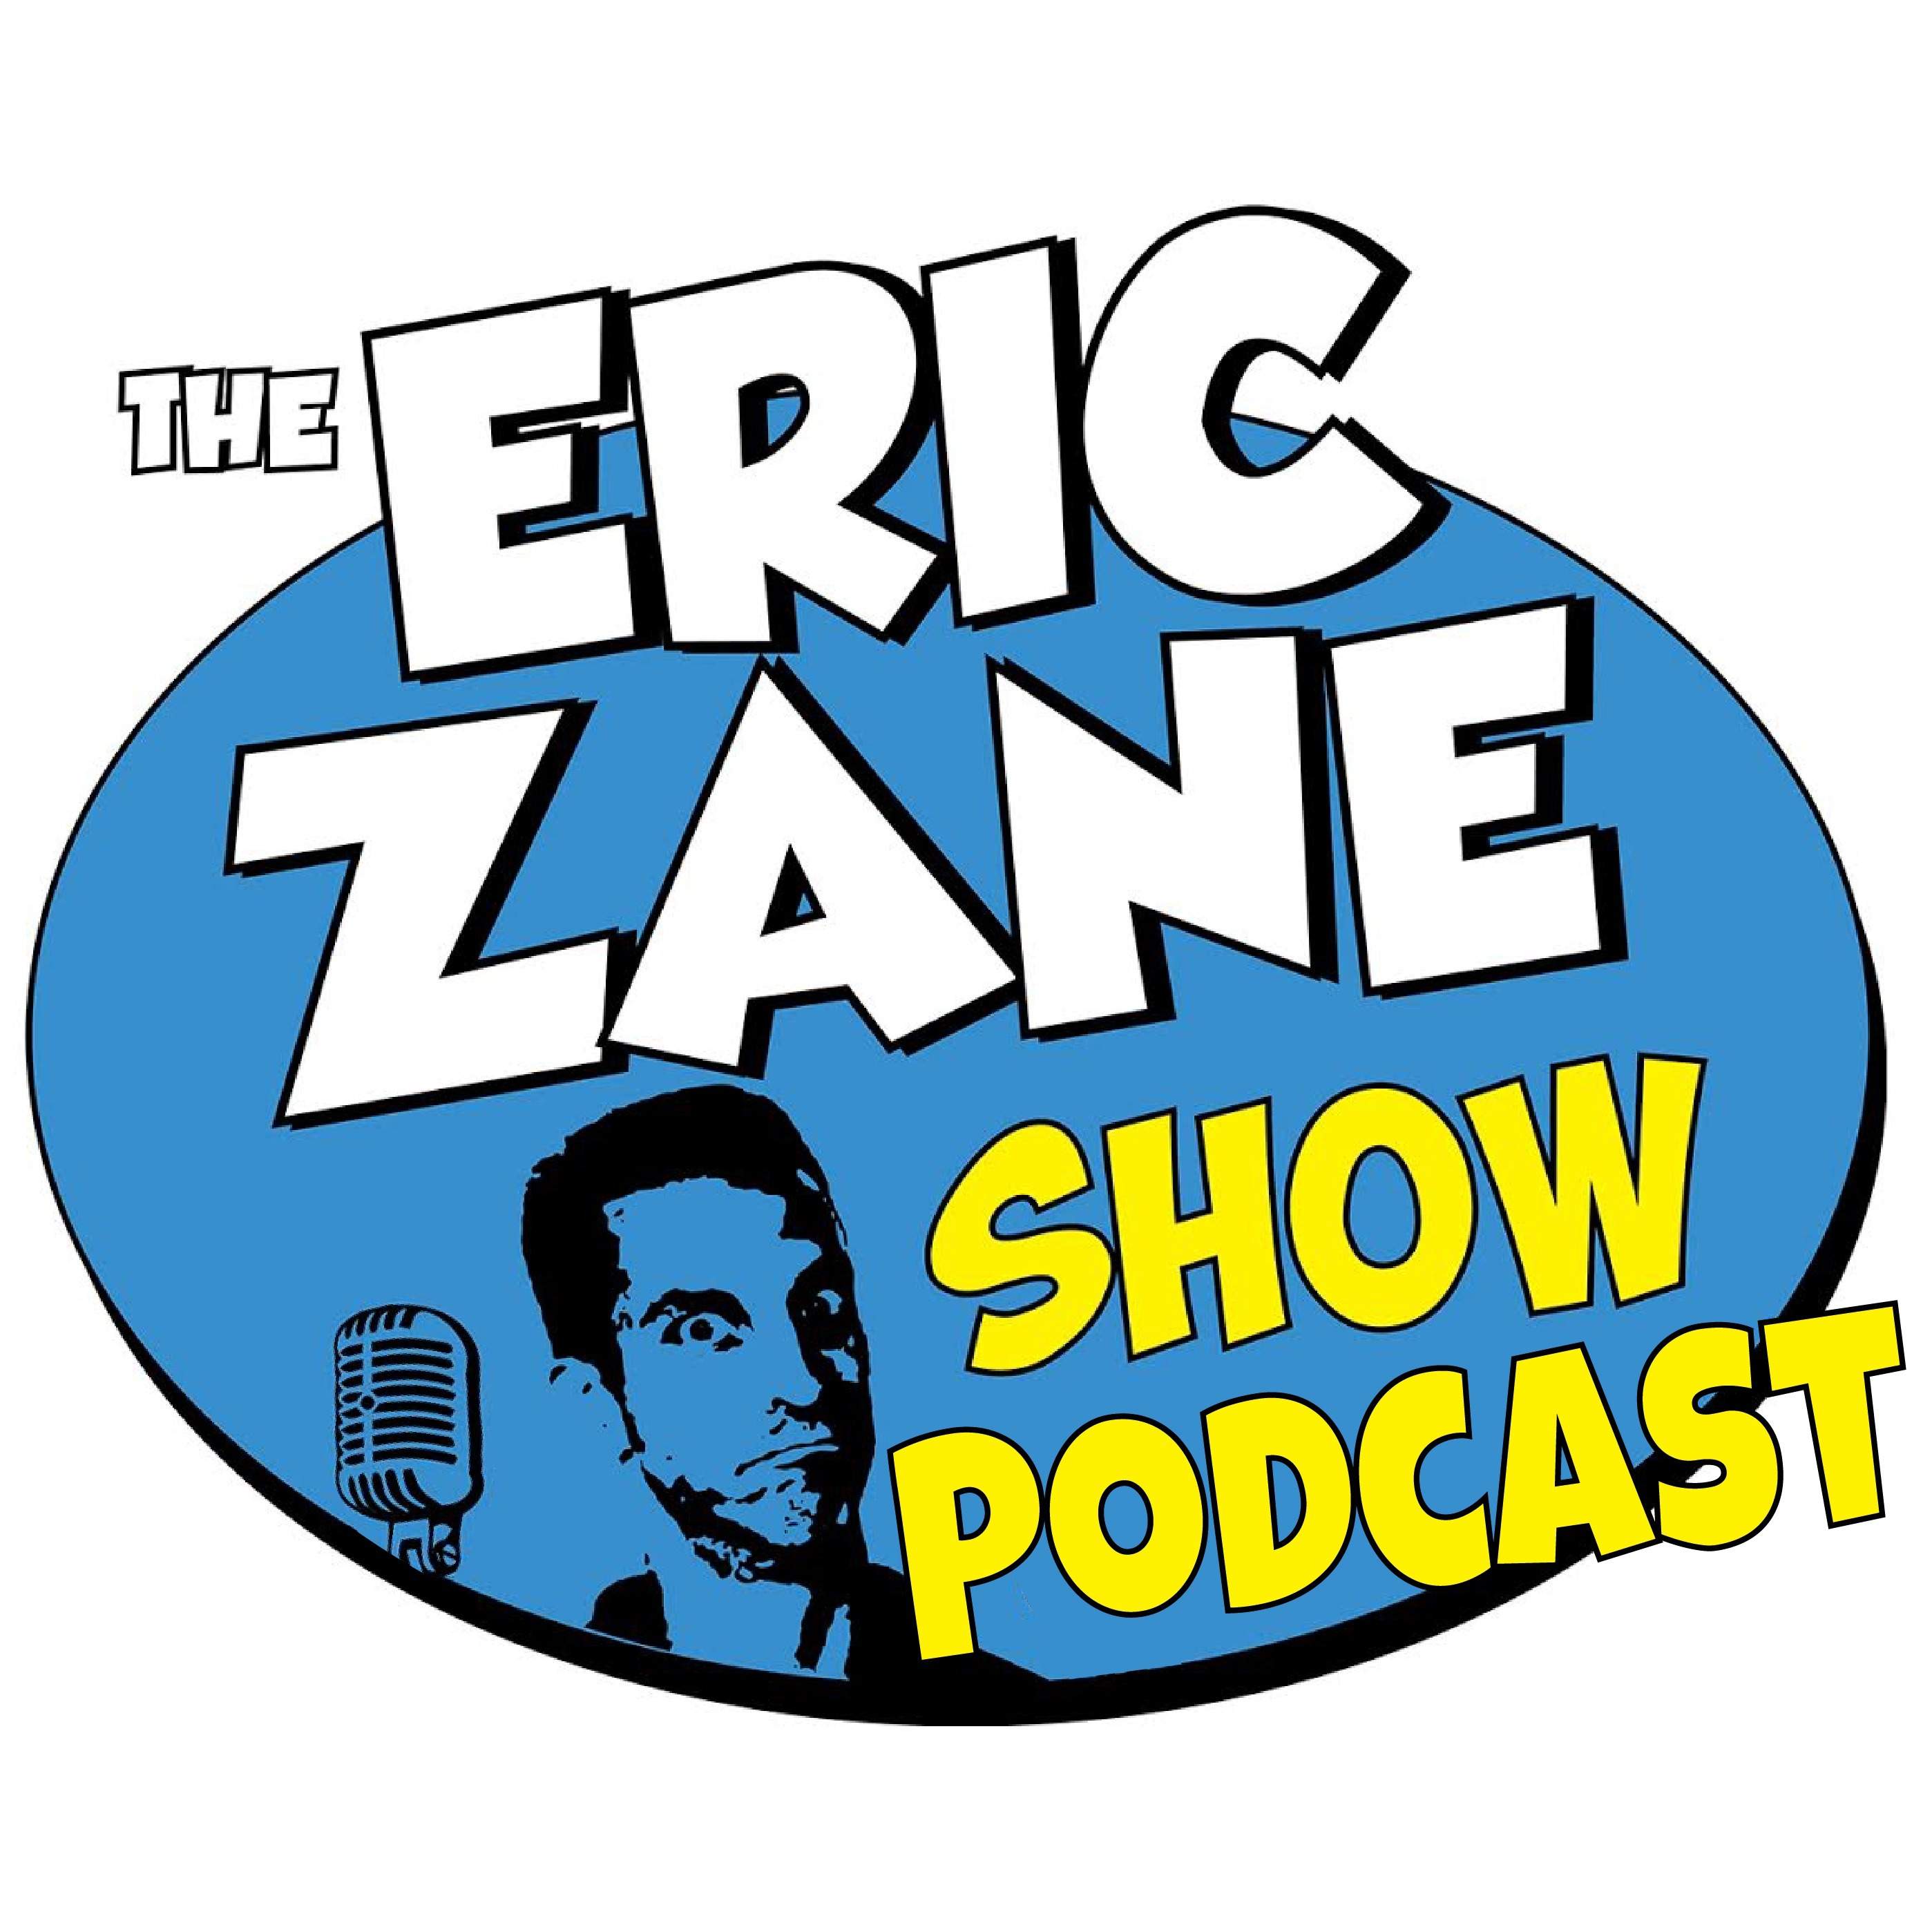 Eric Zane Show Podcast Ep 942 - Joe from FBHW OUT - Let's break it down!